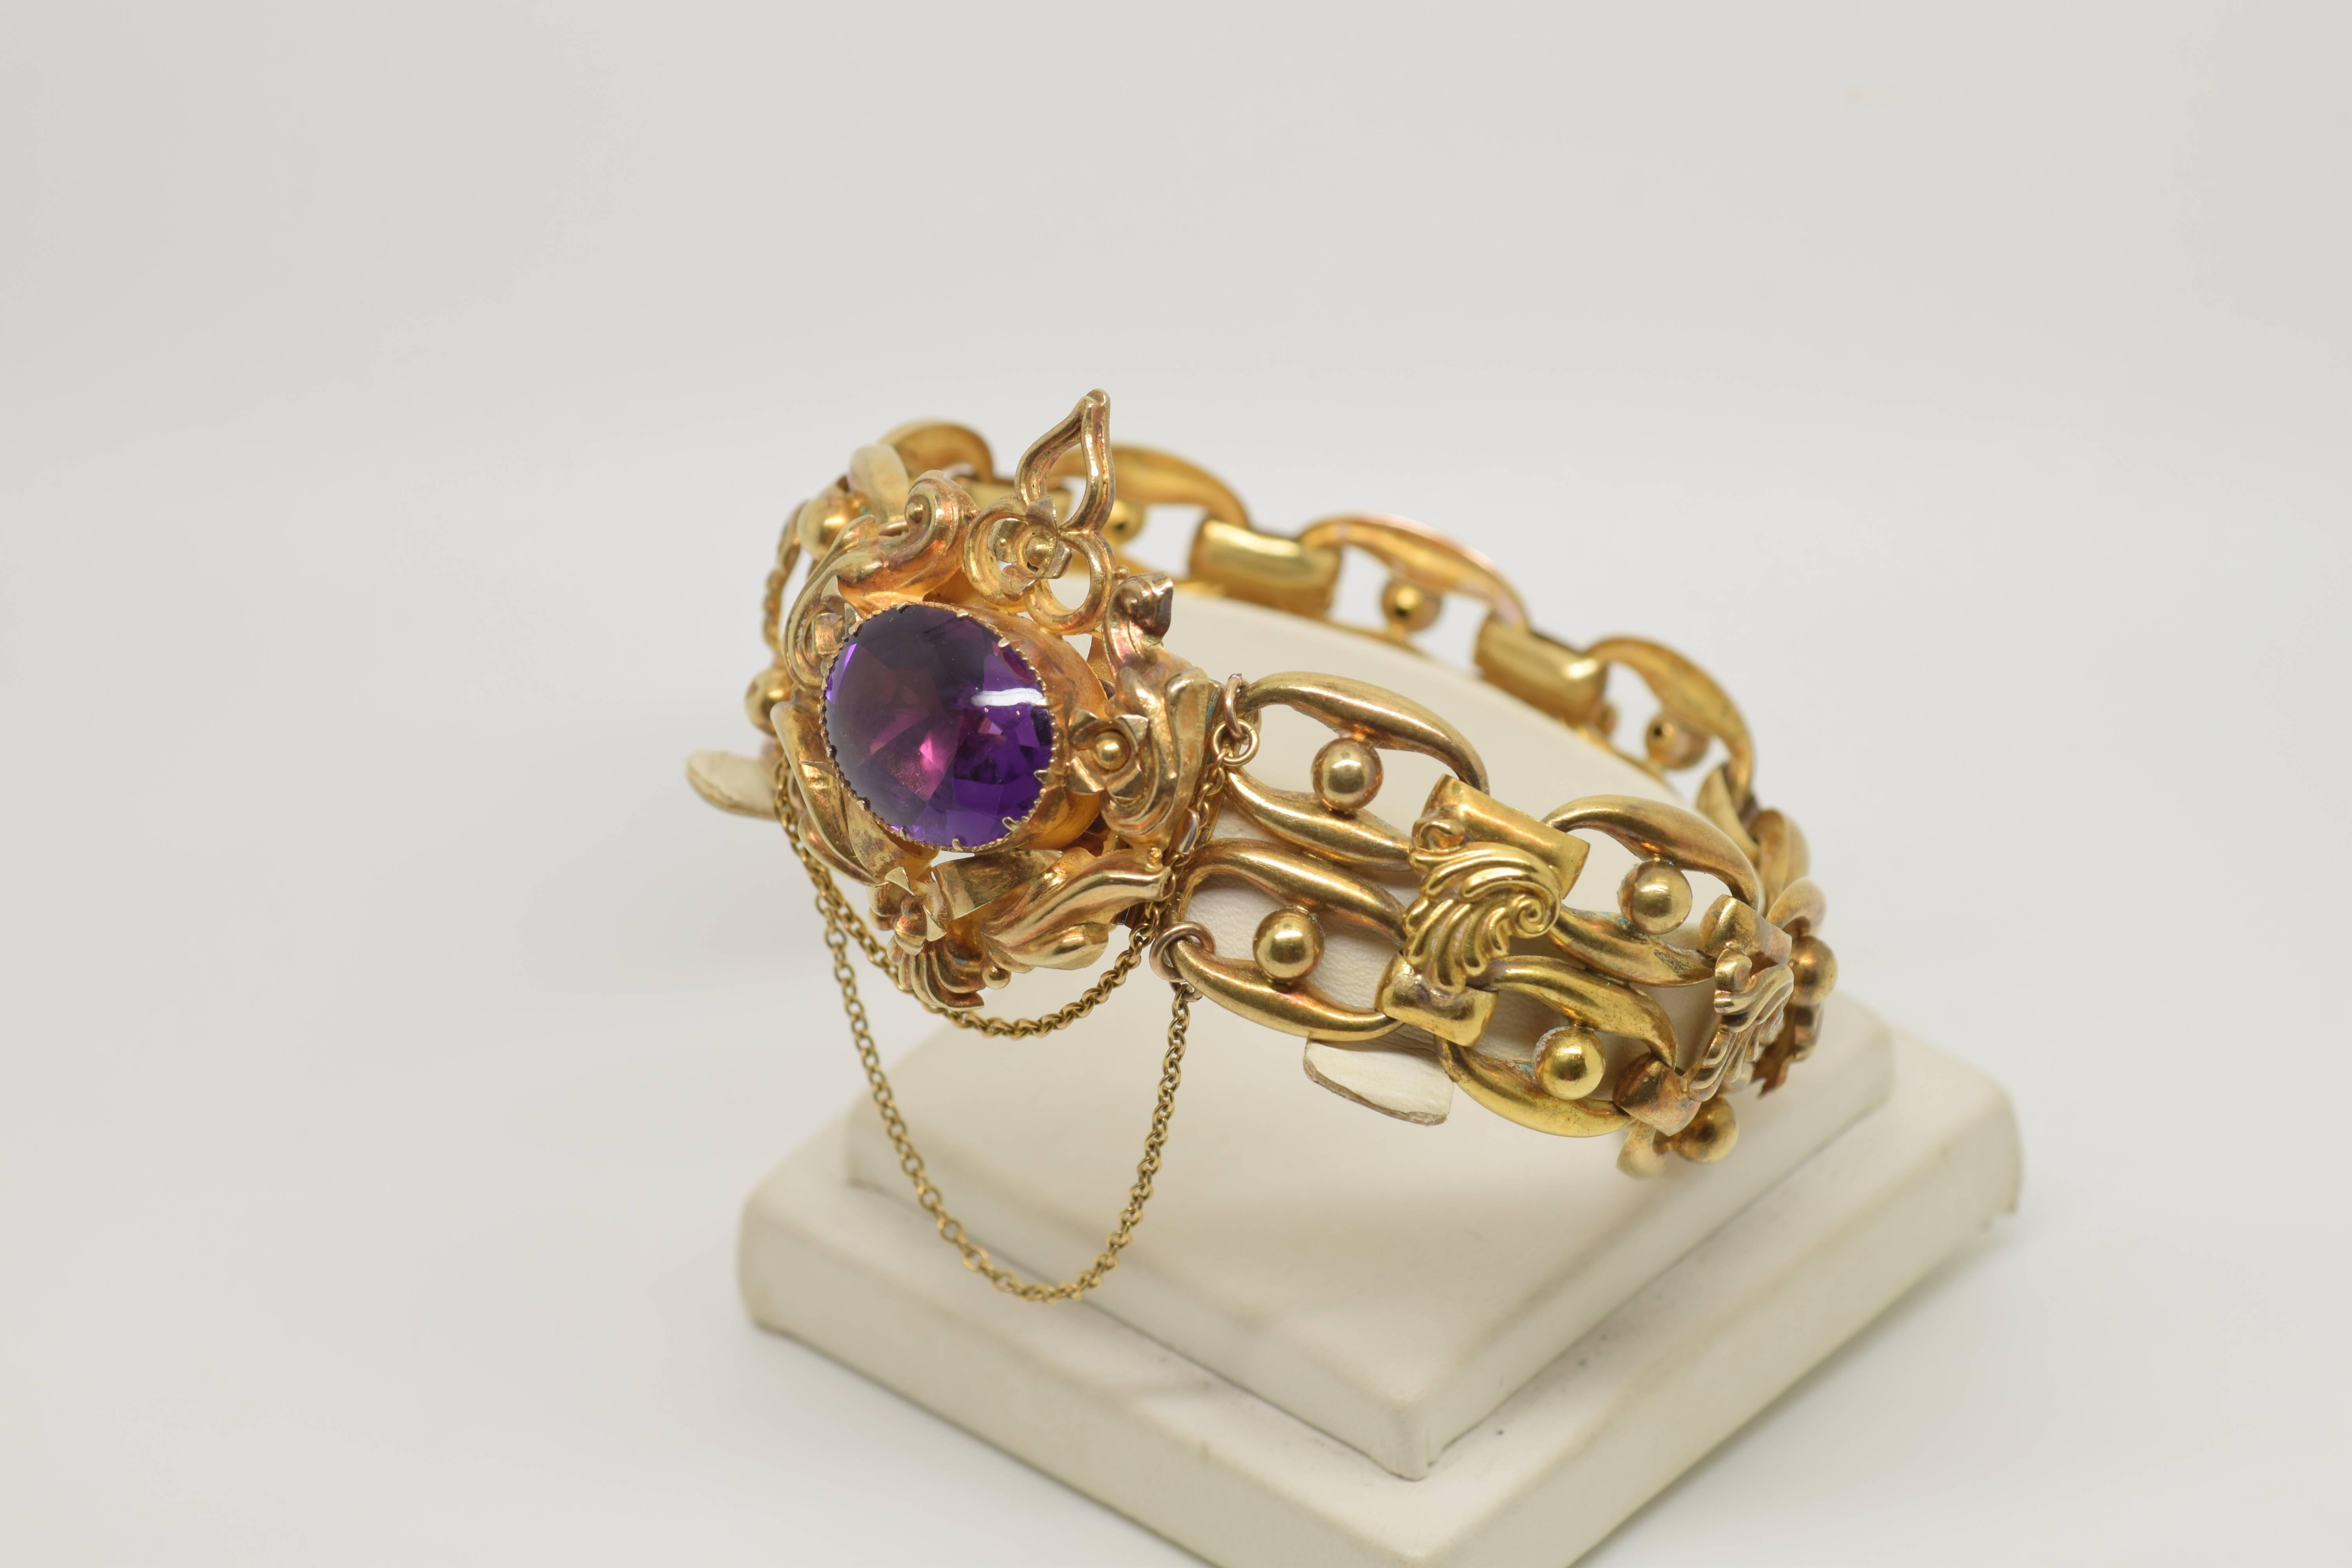 Gold bracelet of 18 carats Victorian composed by a body of calabrotes with pearls in the center, located paired and alternated with small pieces highlighted with a vegetal element in light relief of classicist influence. The clasp of the jewel is